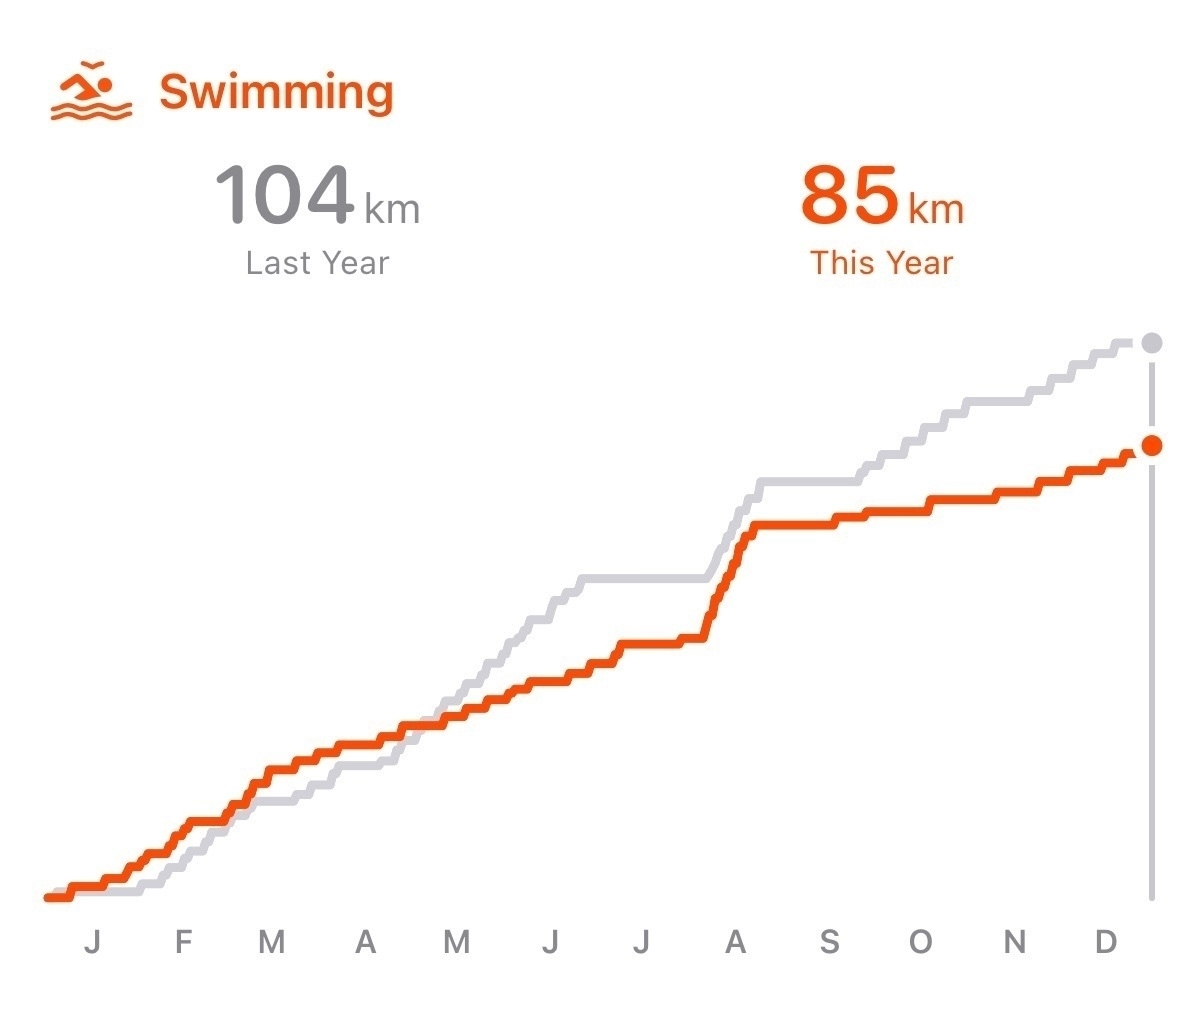 Cumulative swimming totals for 2023 (85 km) and 2022 (104 km)